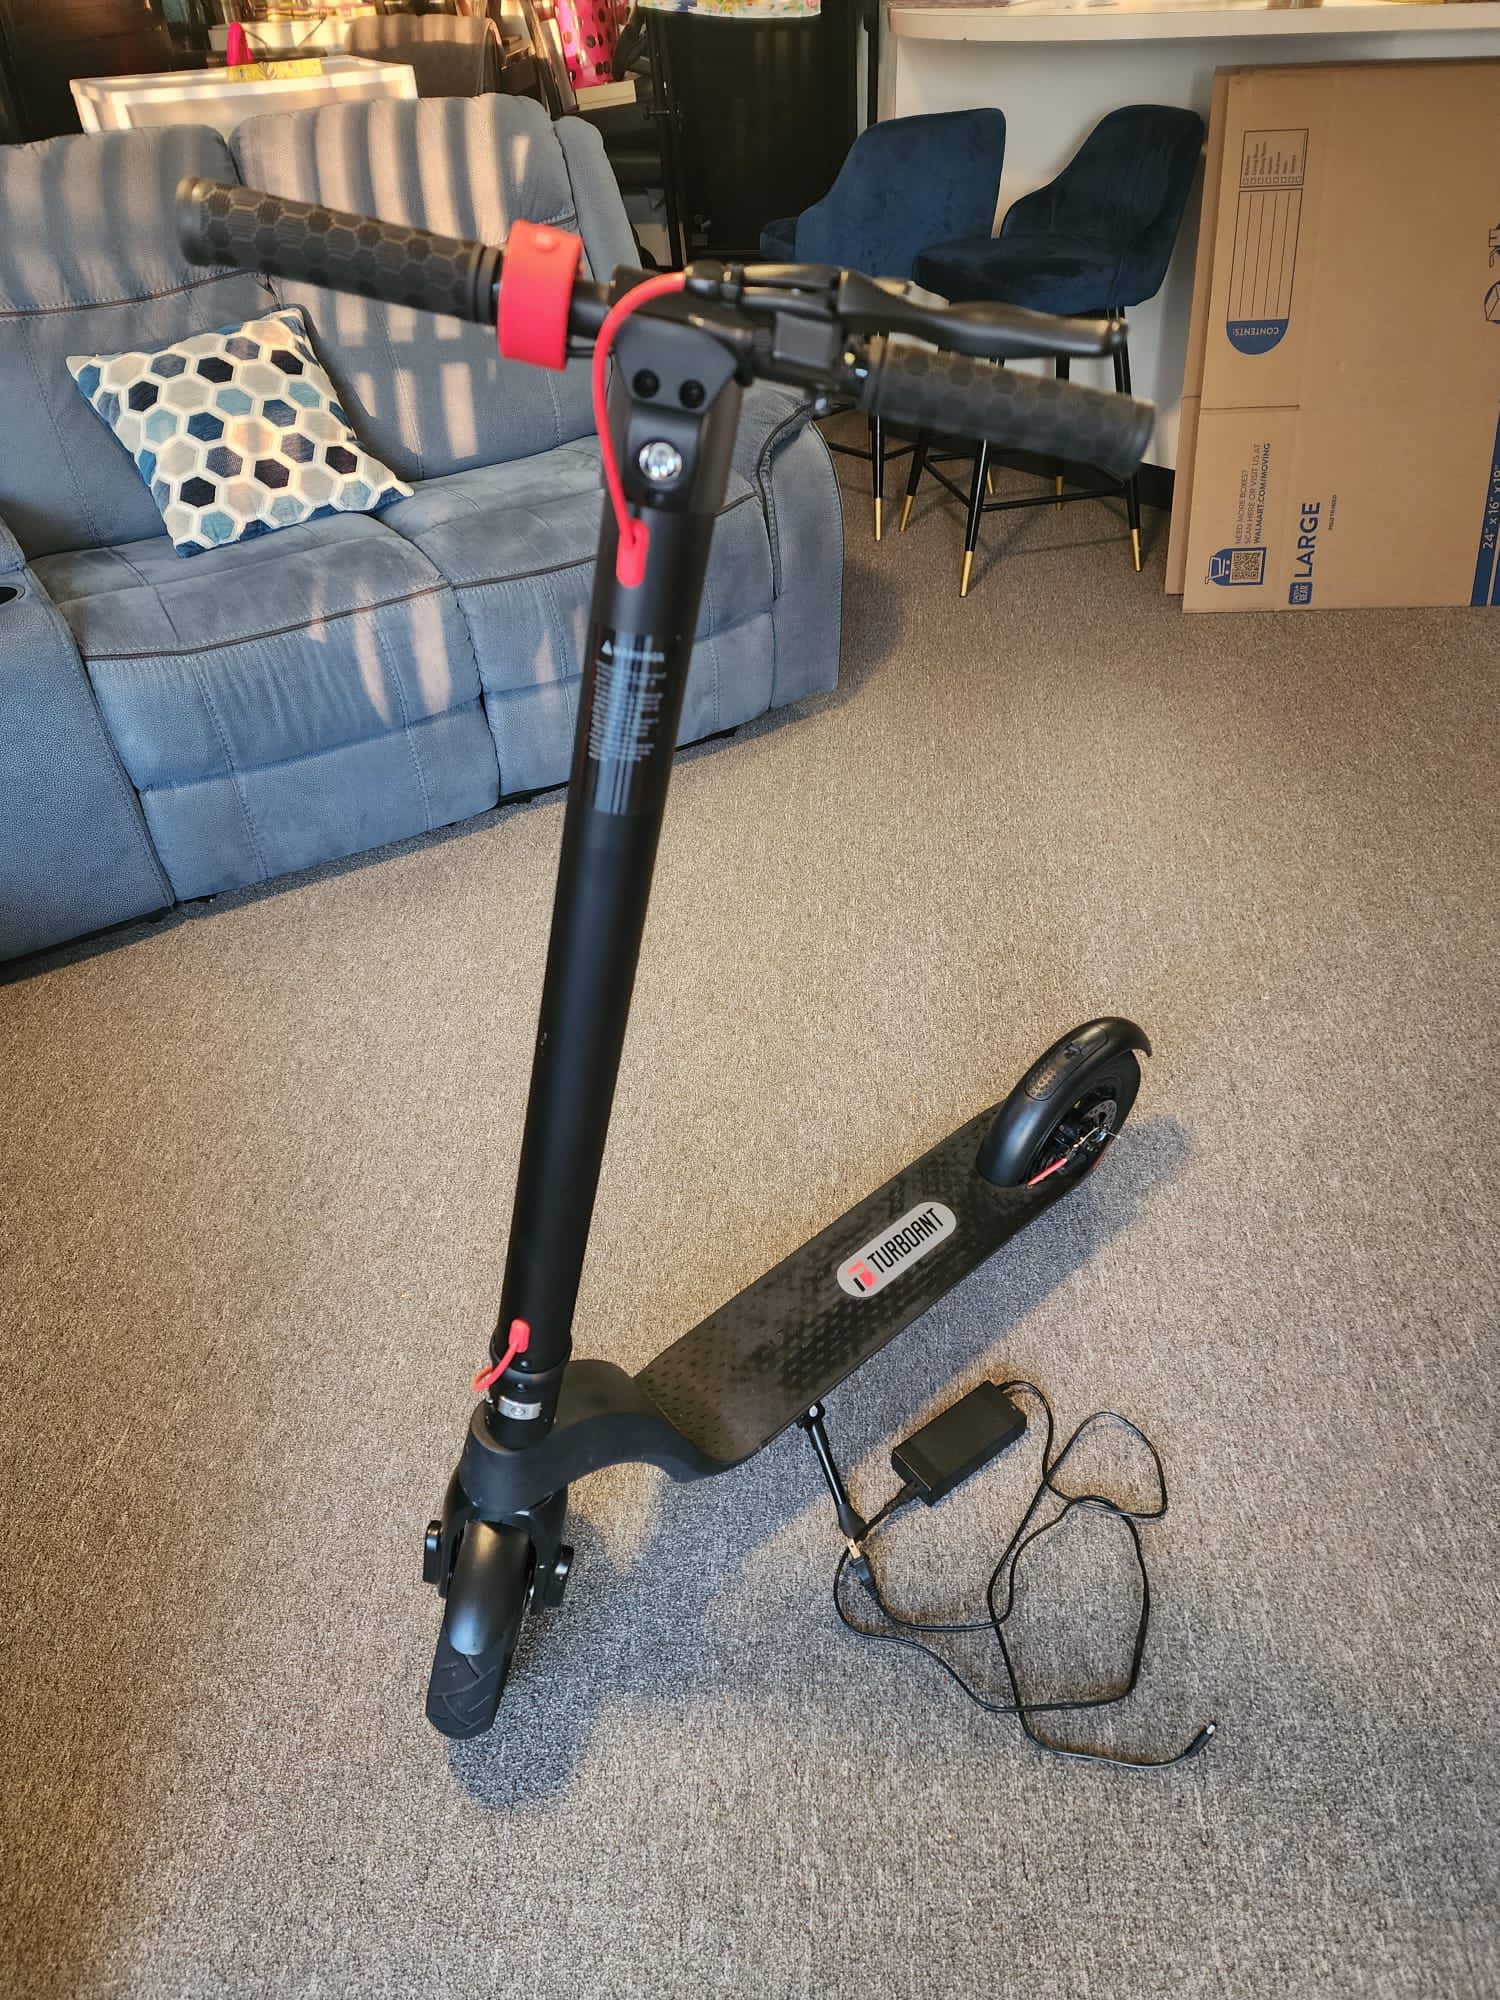 TurboAnt X7 Pro Folding Electric Scooter